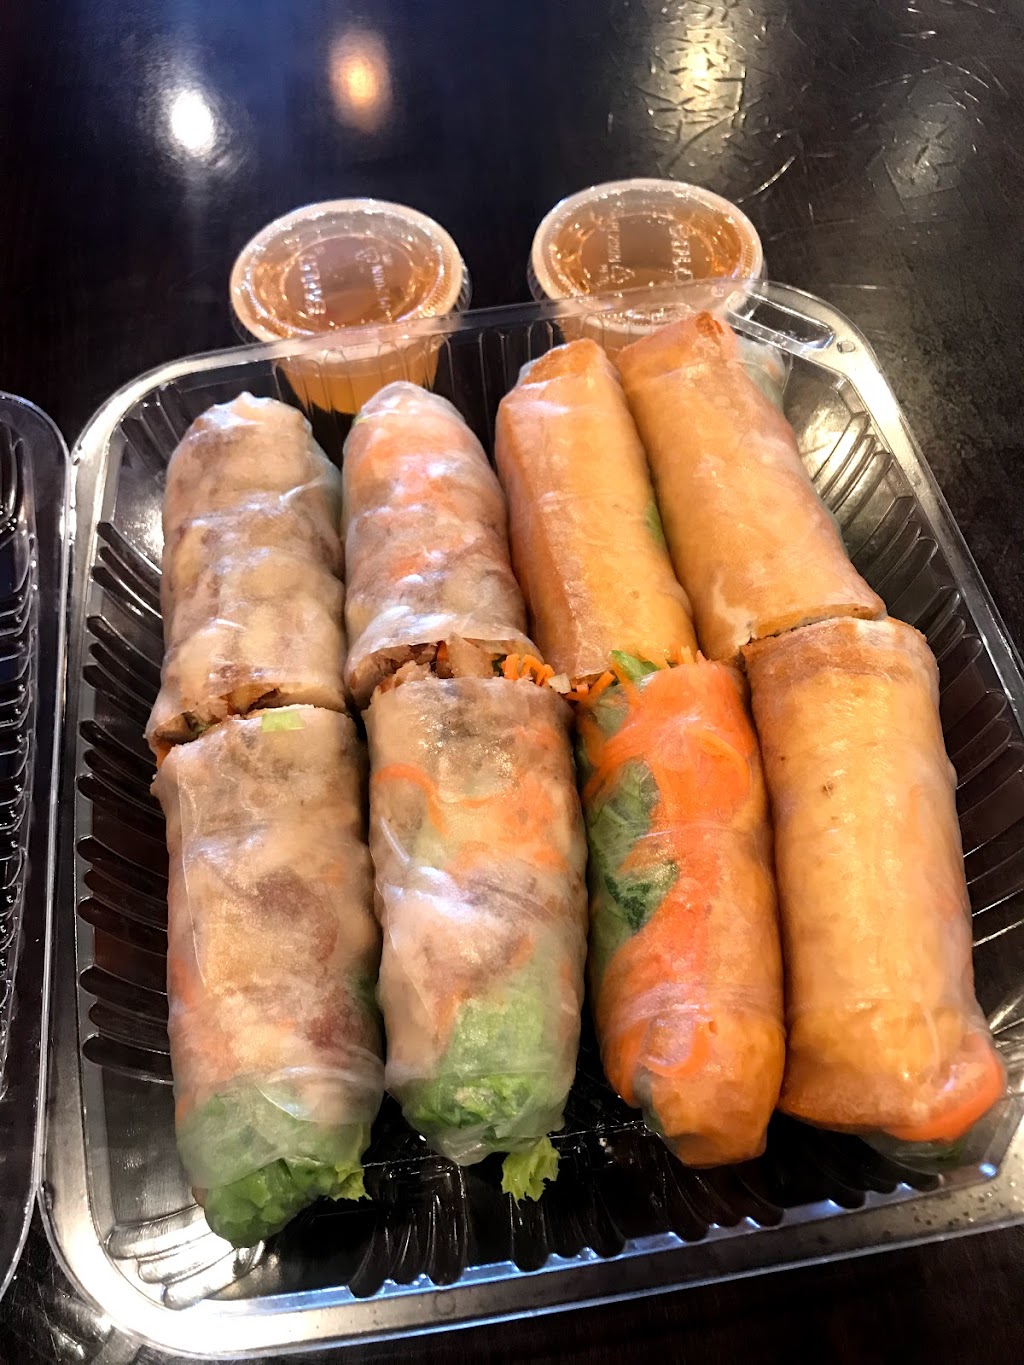 Pho Cafe | 950 King Dr, Daly City, CA 94015 | Phone: (415) 859-7829